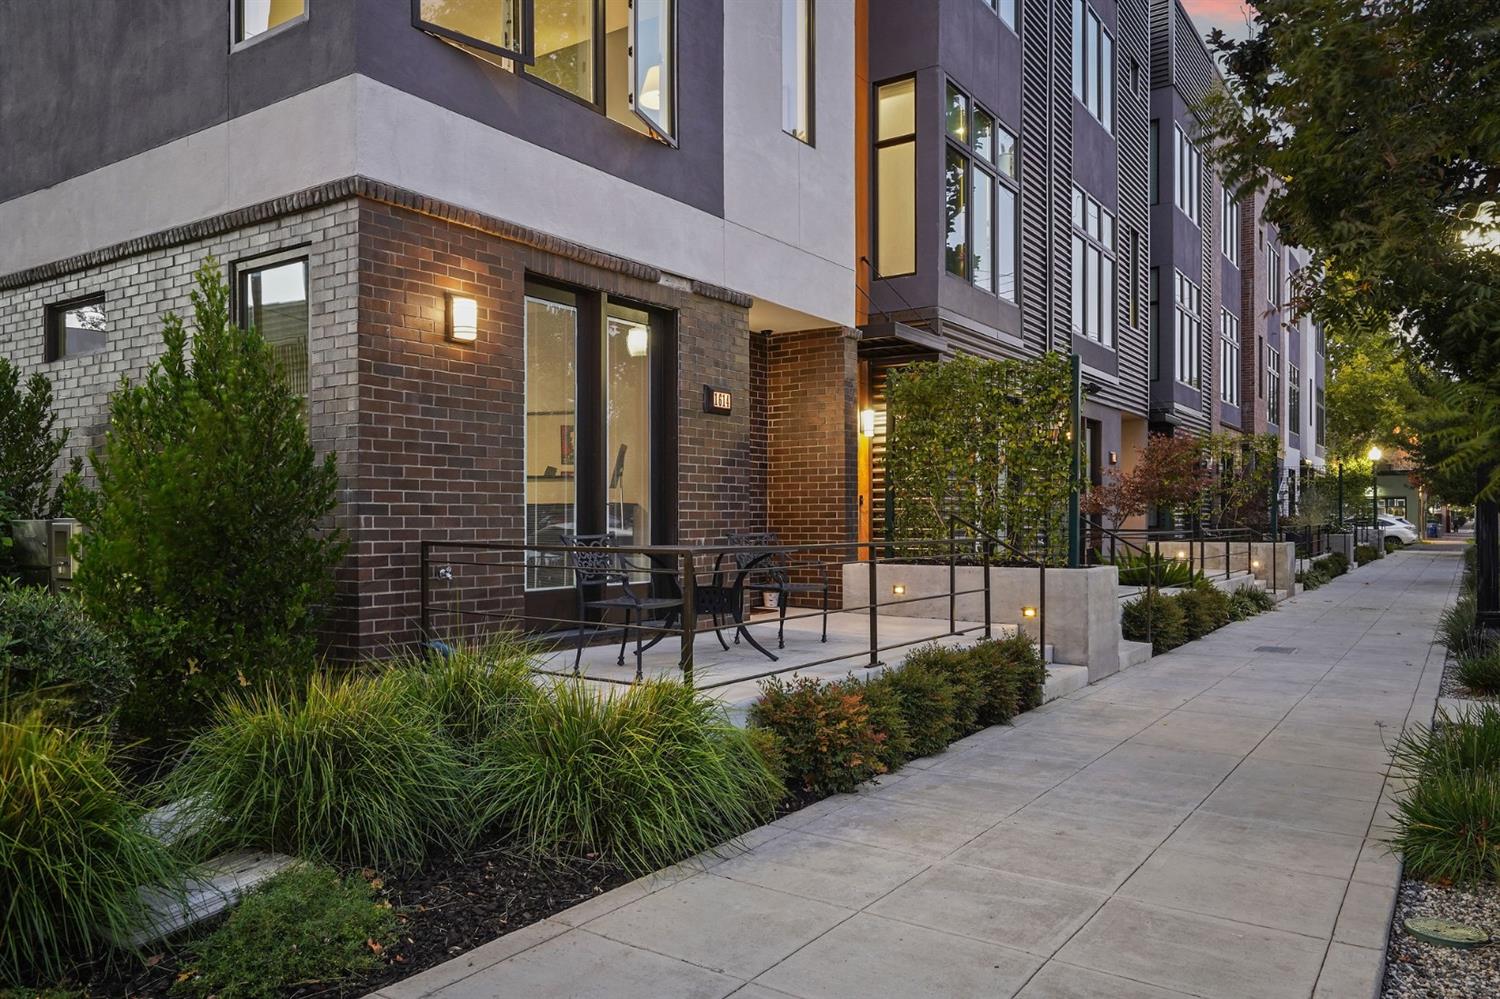 Lofts For Sale in Sacramento and Lofts in Sacramento For Sale, Downtown Sacramento Lofts For Sale Lofts and Urban Living Condominiums